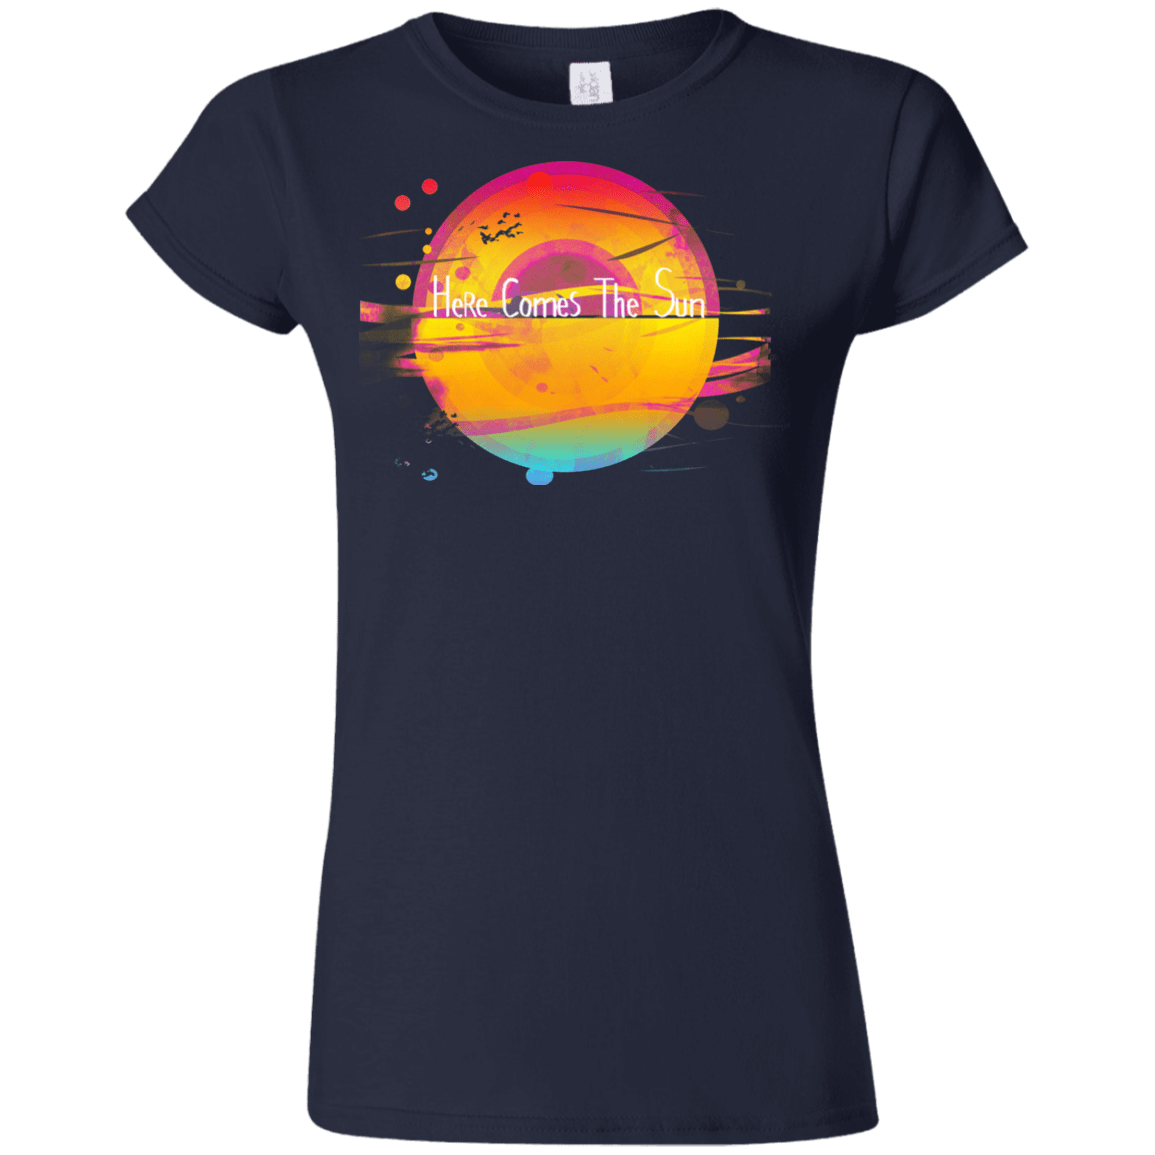 T-Shirts Navy / S Here Comes The Sun (2) Junior Slimmer-Fit T-Shirt